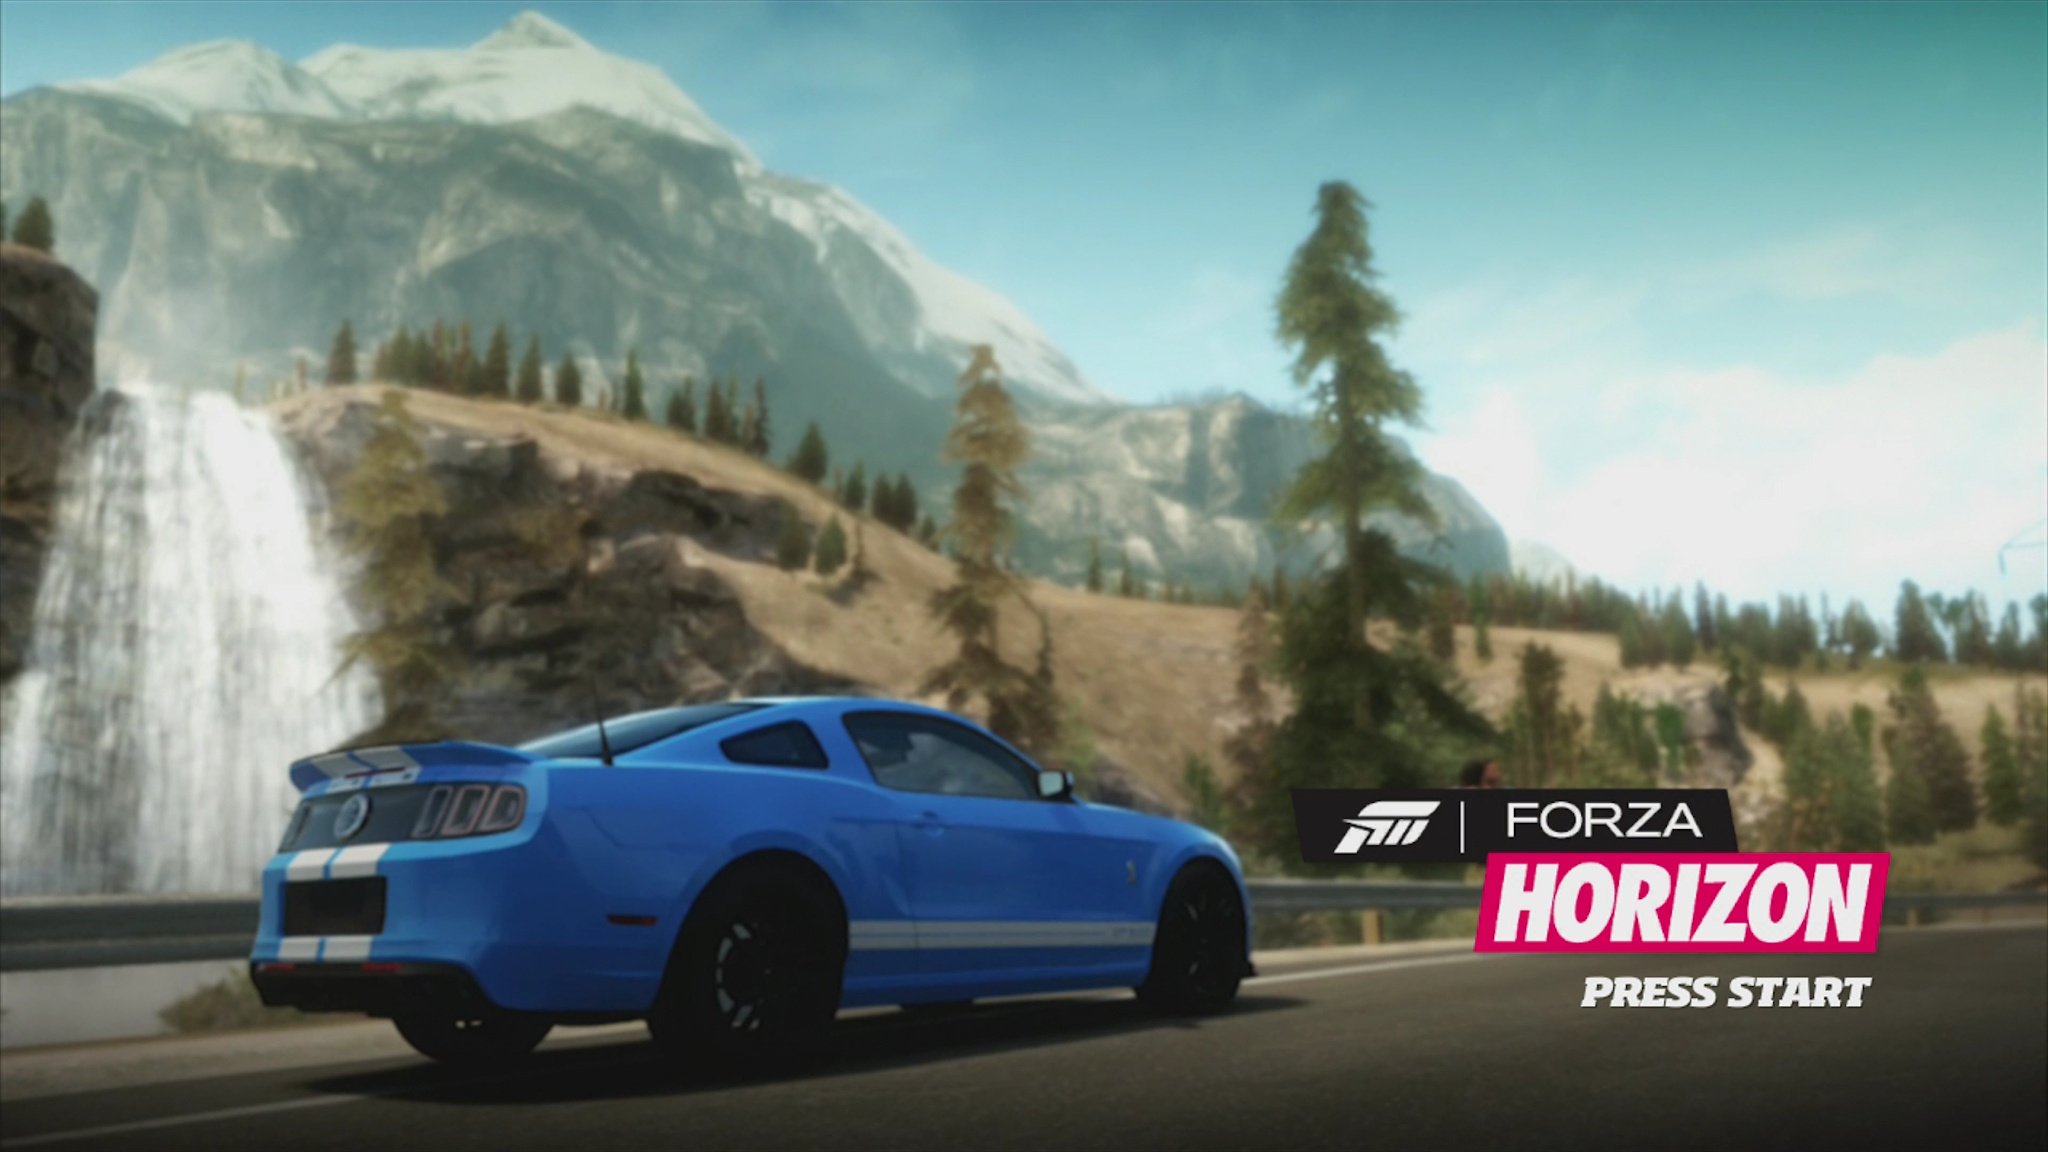 The Top Xbox 360 games we wantto play on Xbox One Forza Horizon